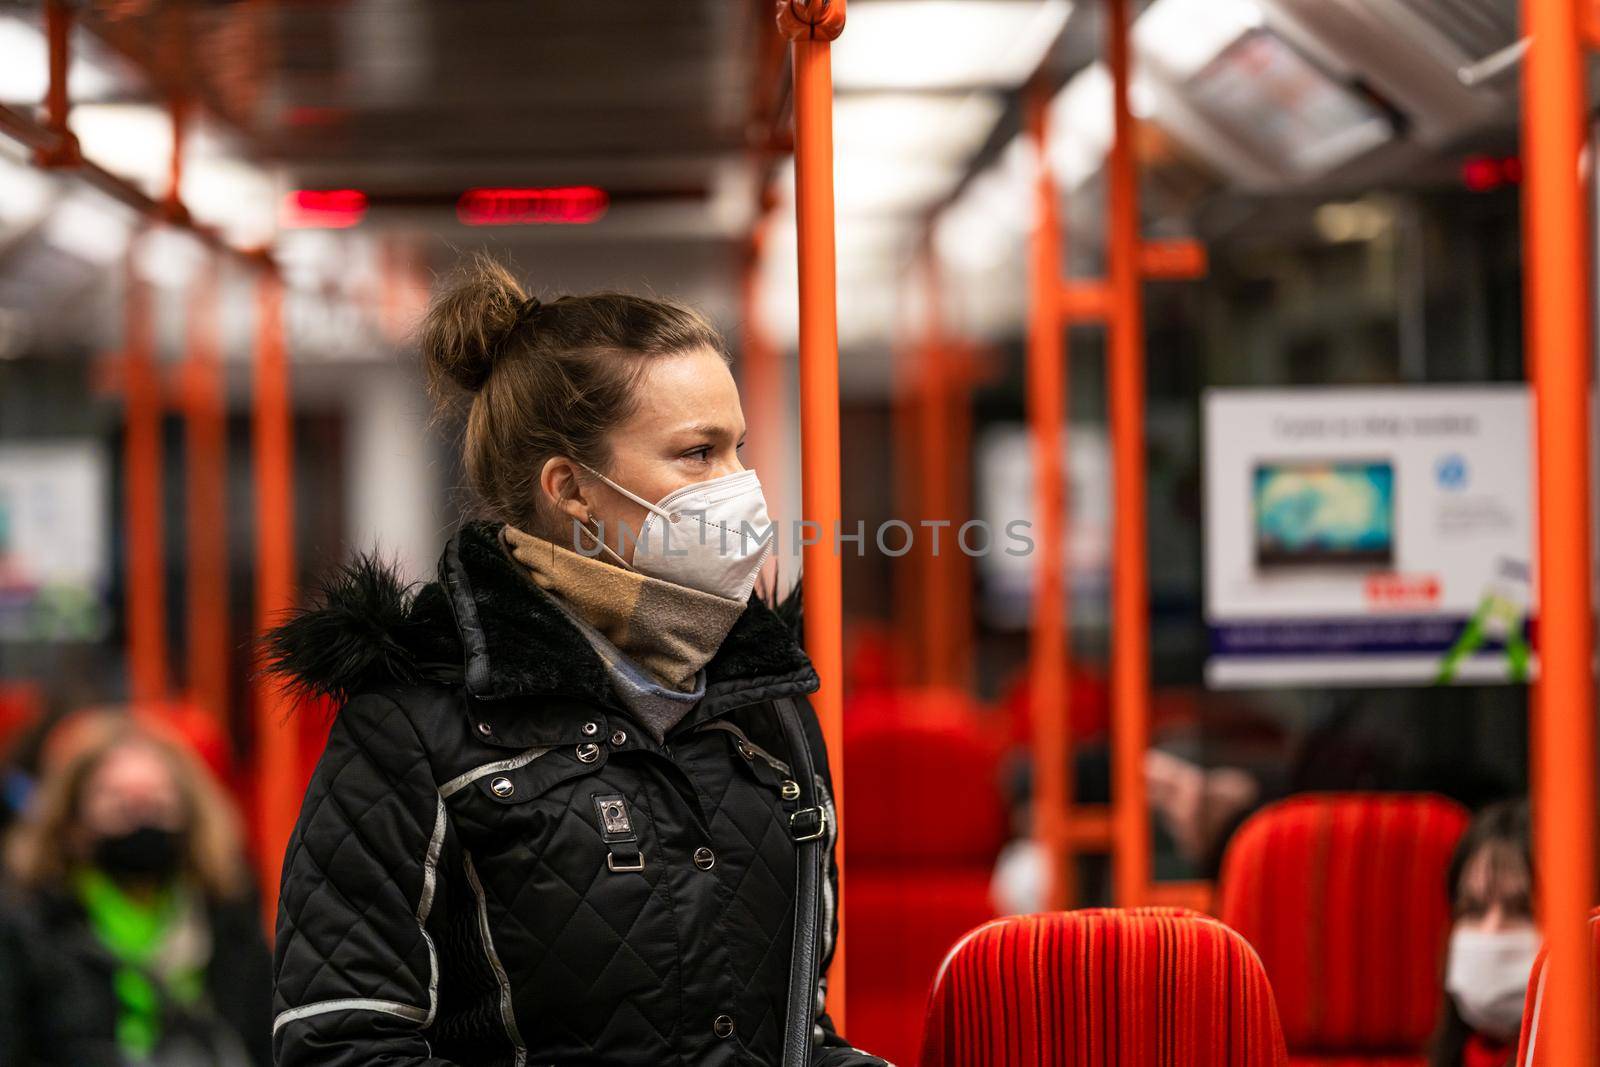 The woman travels by public transport around the city.